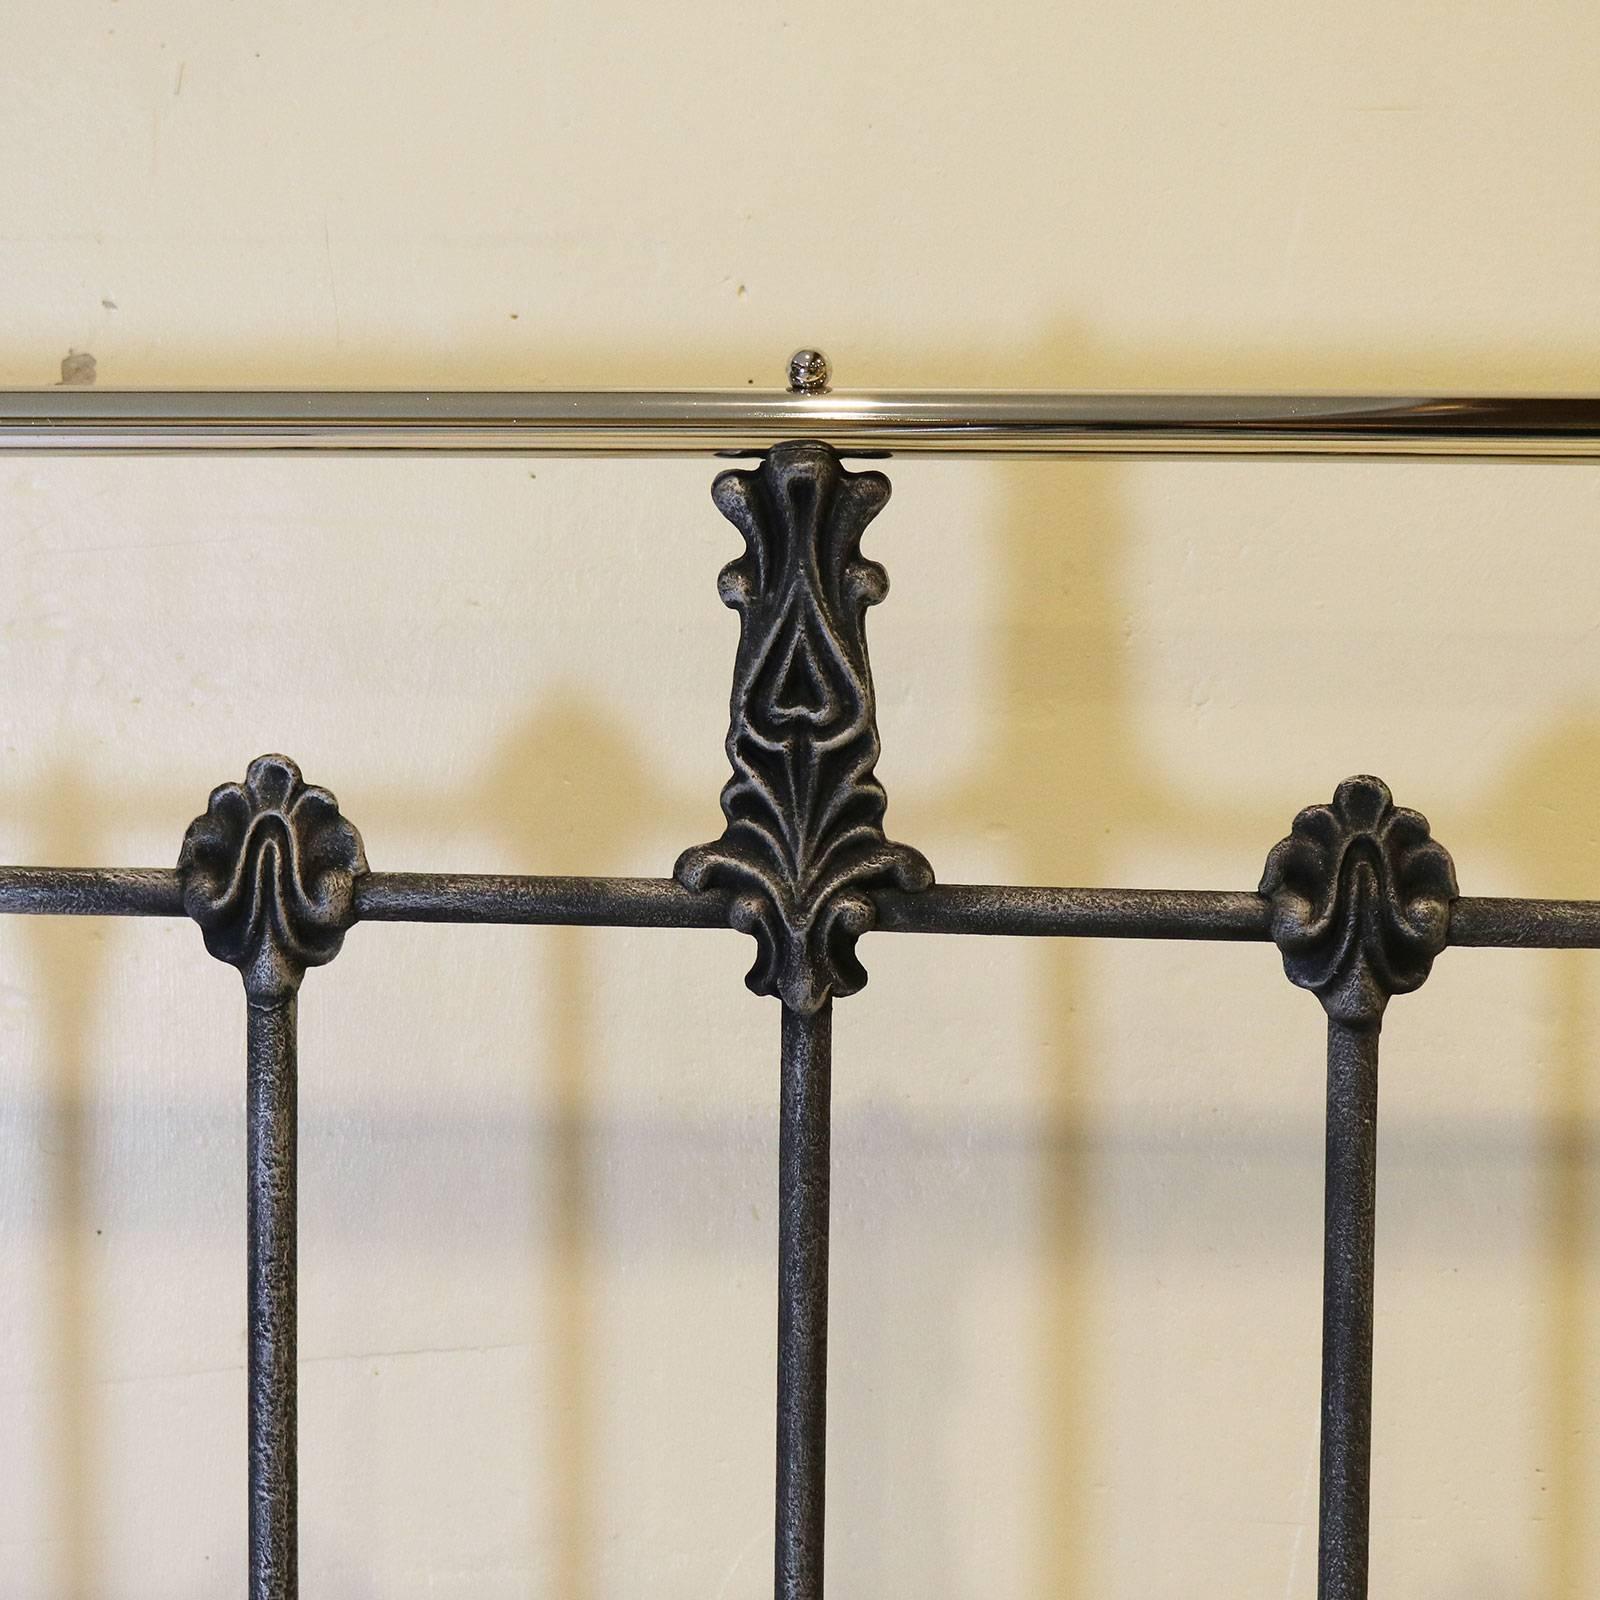 A metal bed with decorative castings and nickel-plated brass work, adapted from an original Victorian bed, finished in black with silver paint effect.

This bed accepts a British king-size or American queen-size (60 inches, 5ft or 150cm wide) base